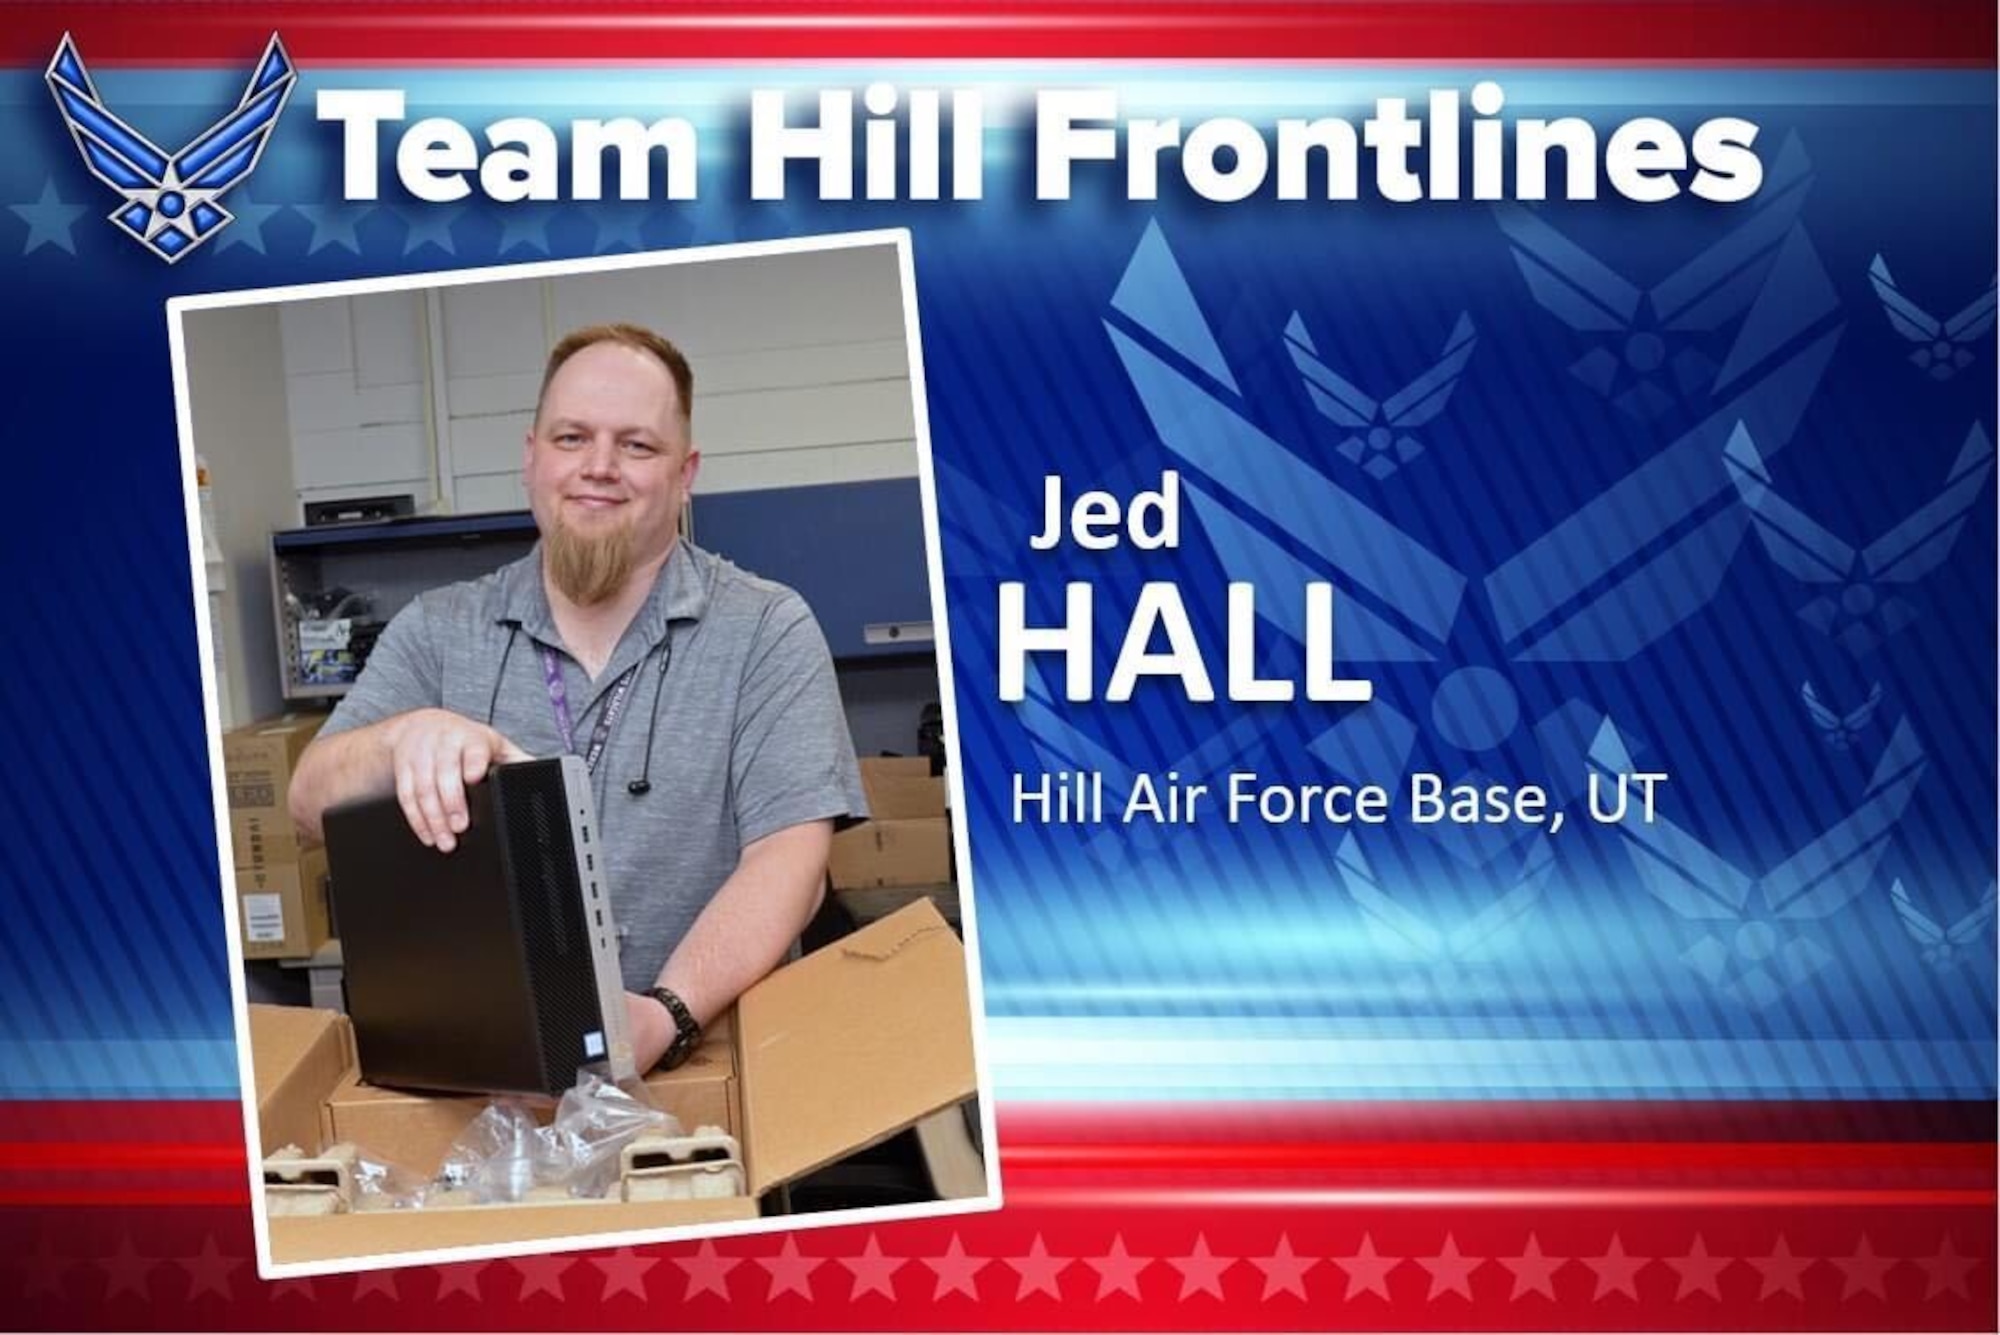 Team Hill Frontlines: Jed Hall